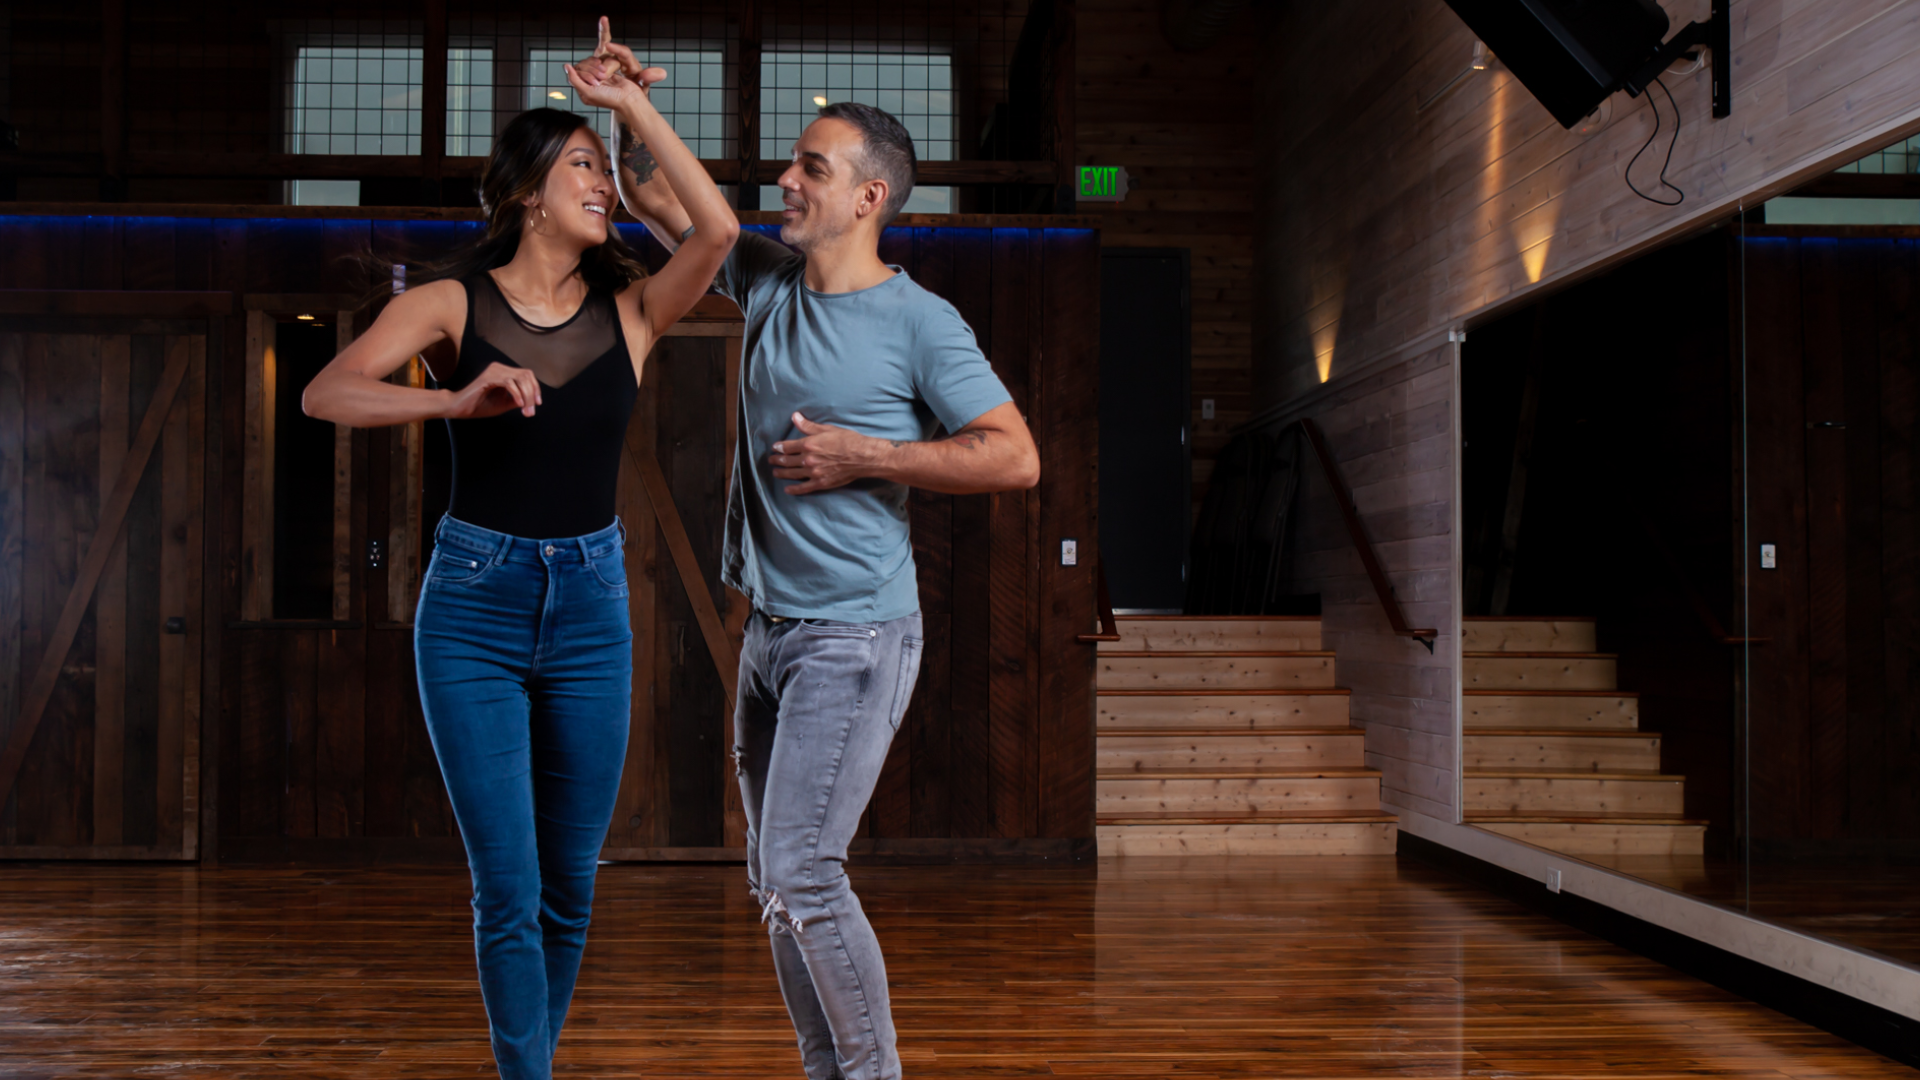 Artistic Director Vassili William teaches us this social partner dance originating from the Dominican Republic that provides a great workout.